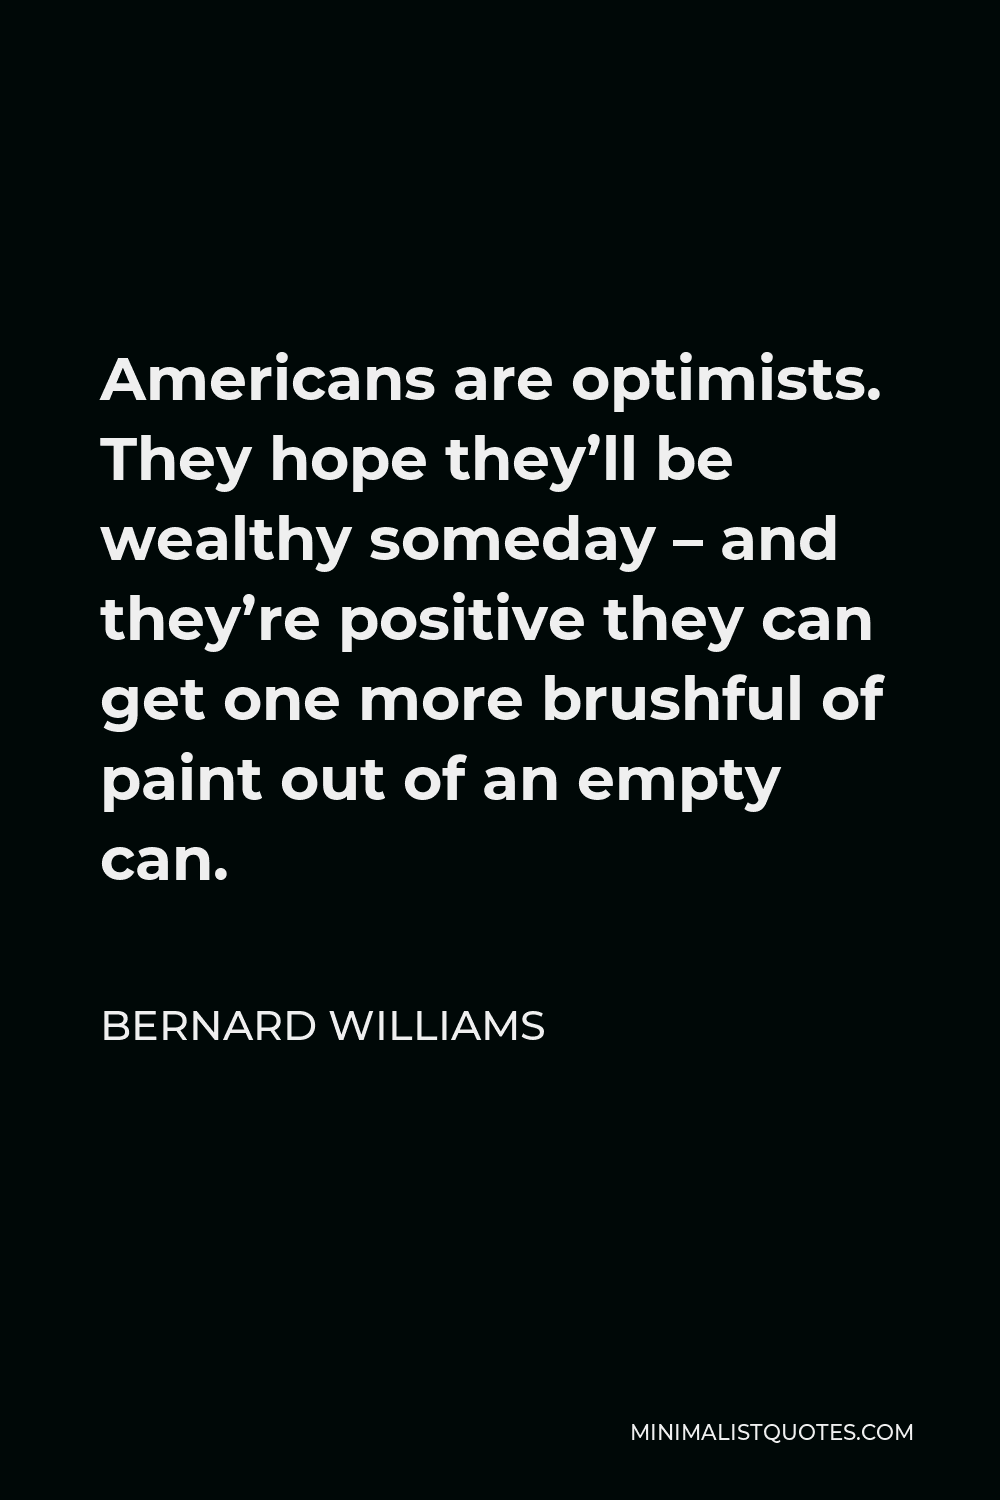 Bernard Williams Quote - Americans are optimists. They hope they’ll be wealthy someday – and they’re positive they can get one more brushful of paint out of an empty can.